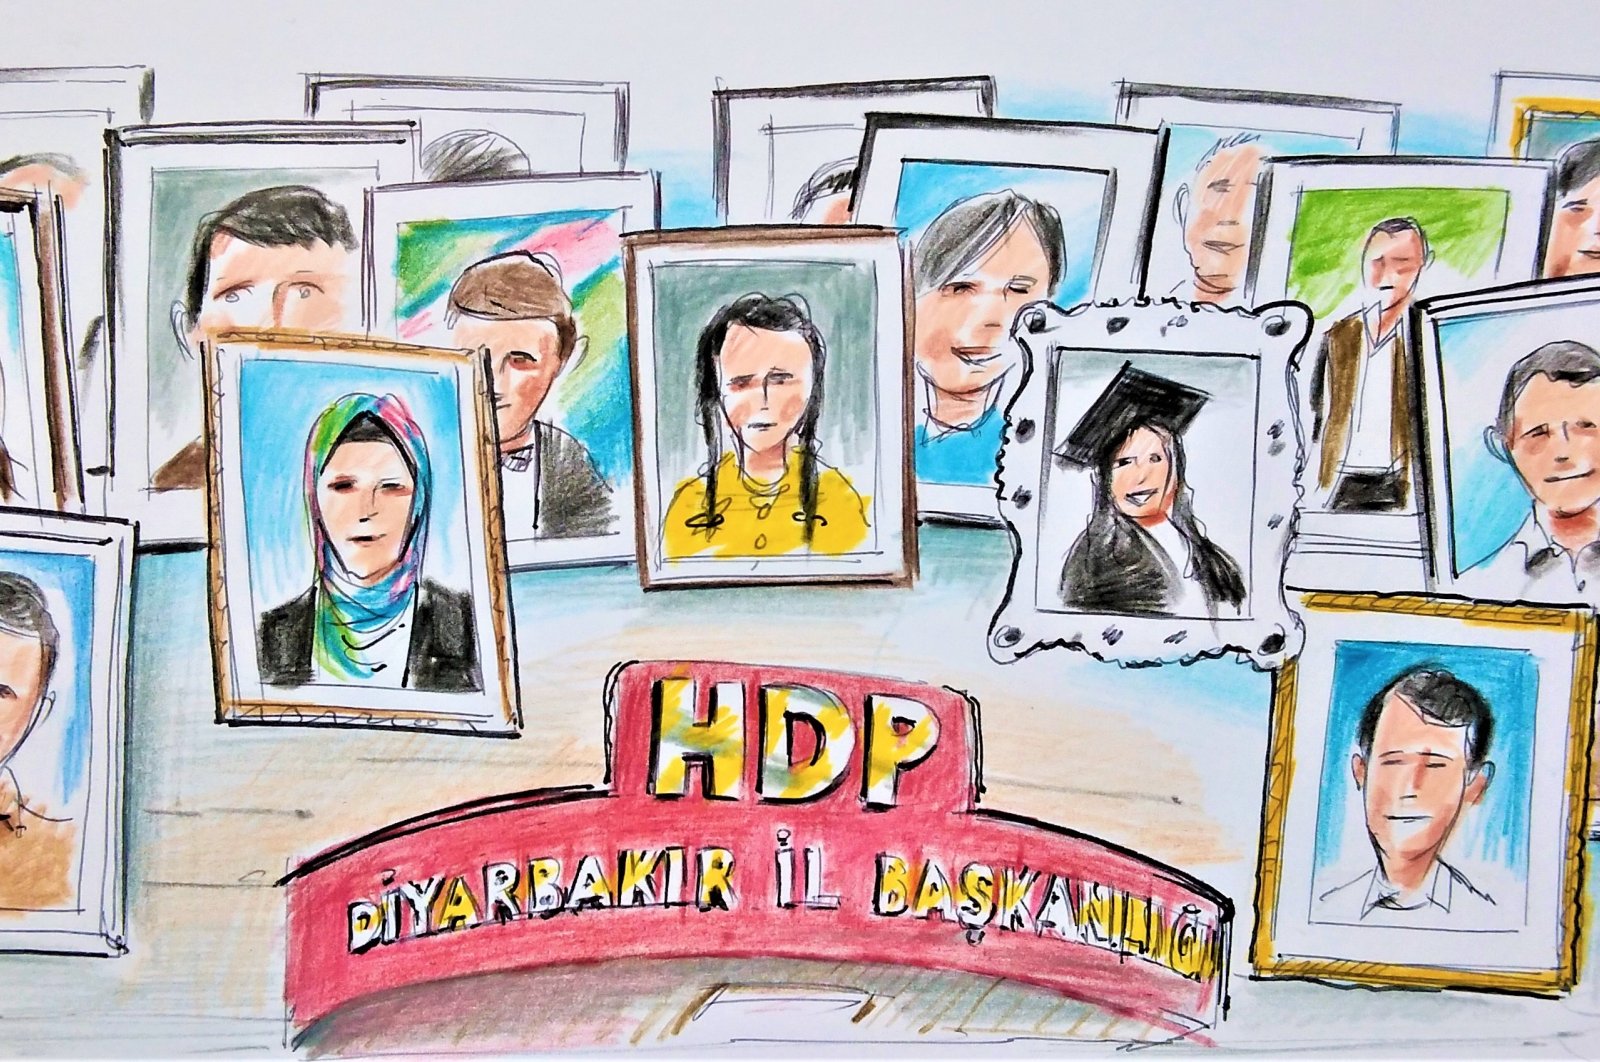 Illustration by Erhan Yalvaç shows the photos of children abducted by the PKK terrorist organization at the pro-PKK Peoples Democratic Party’s (HDP) headquarters in the southeastern province of Diyarbakır in Turkey.